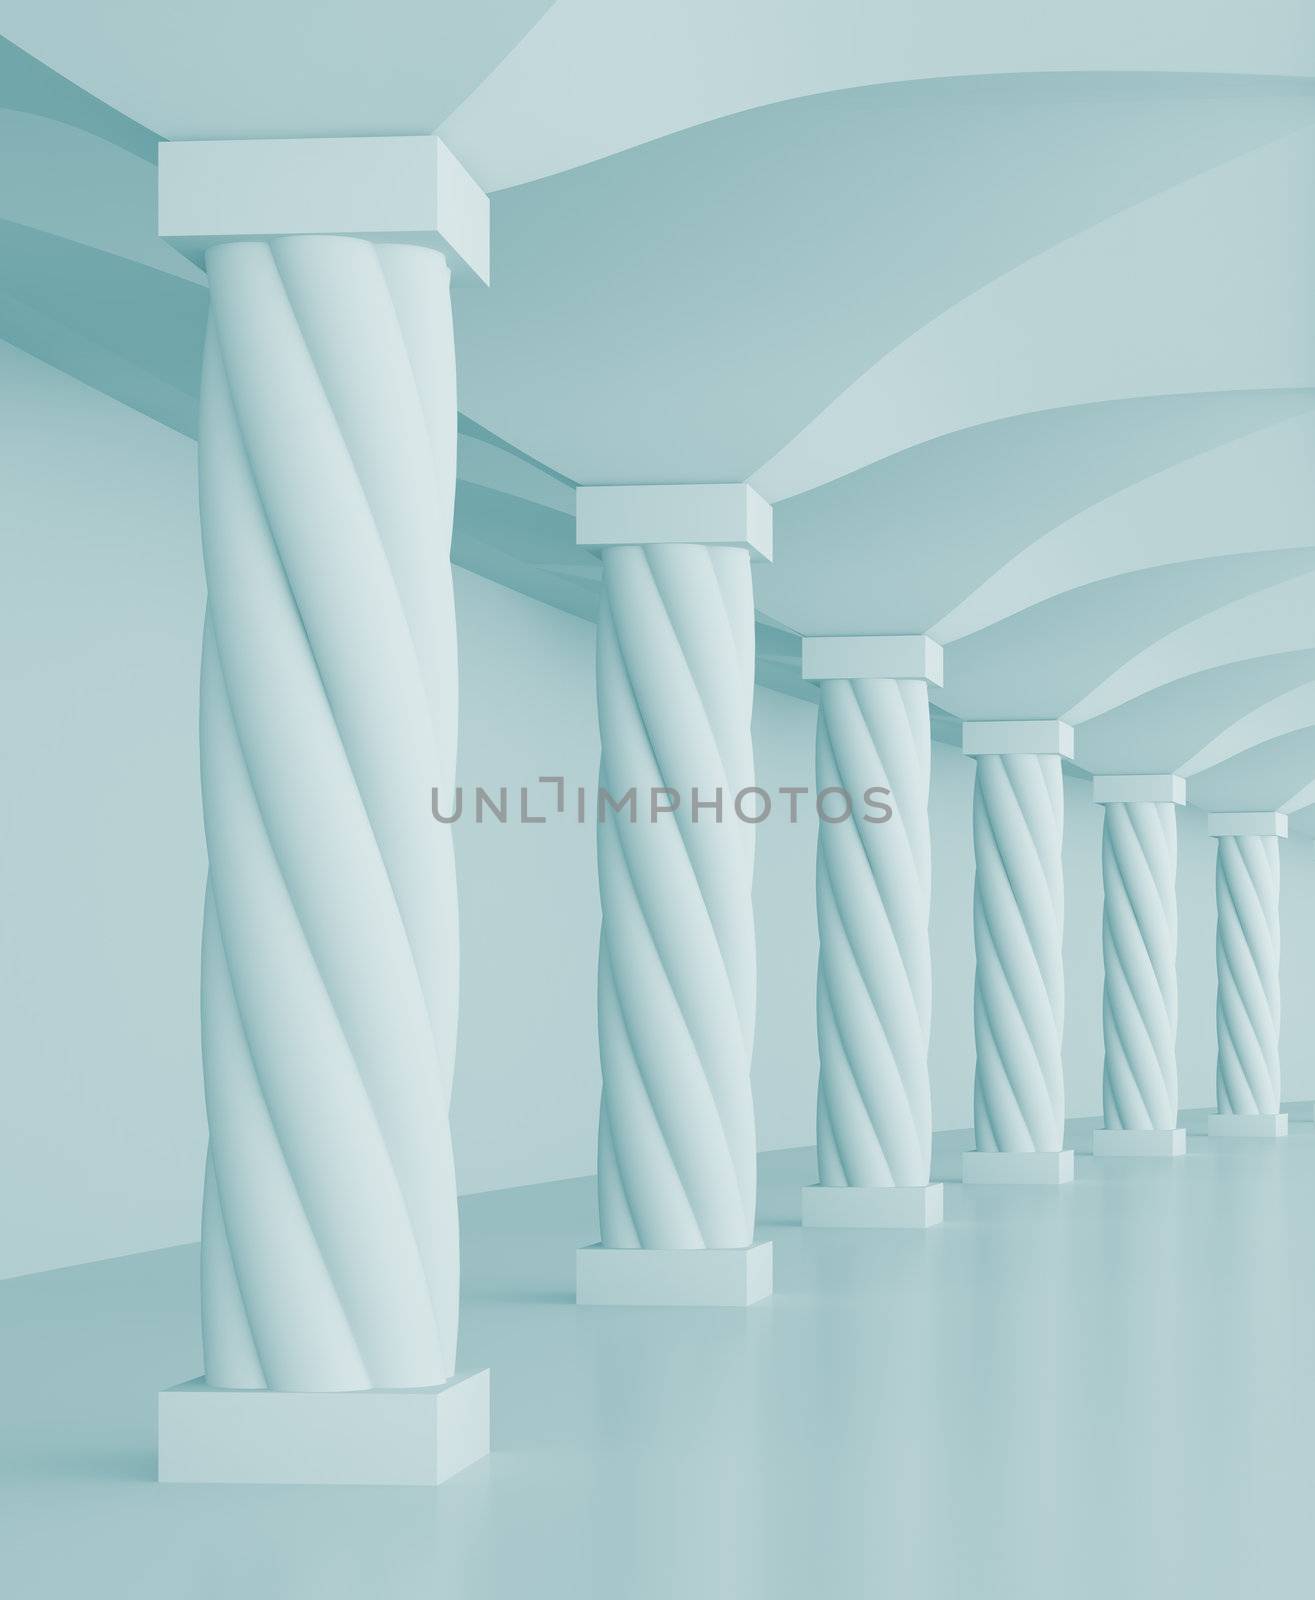 3d Illustration of Columns Hall  or Architecture Background